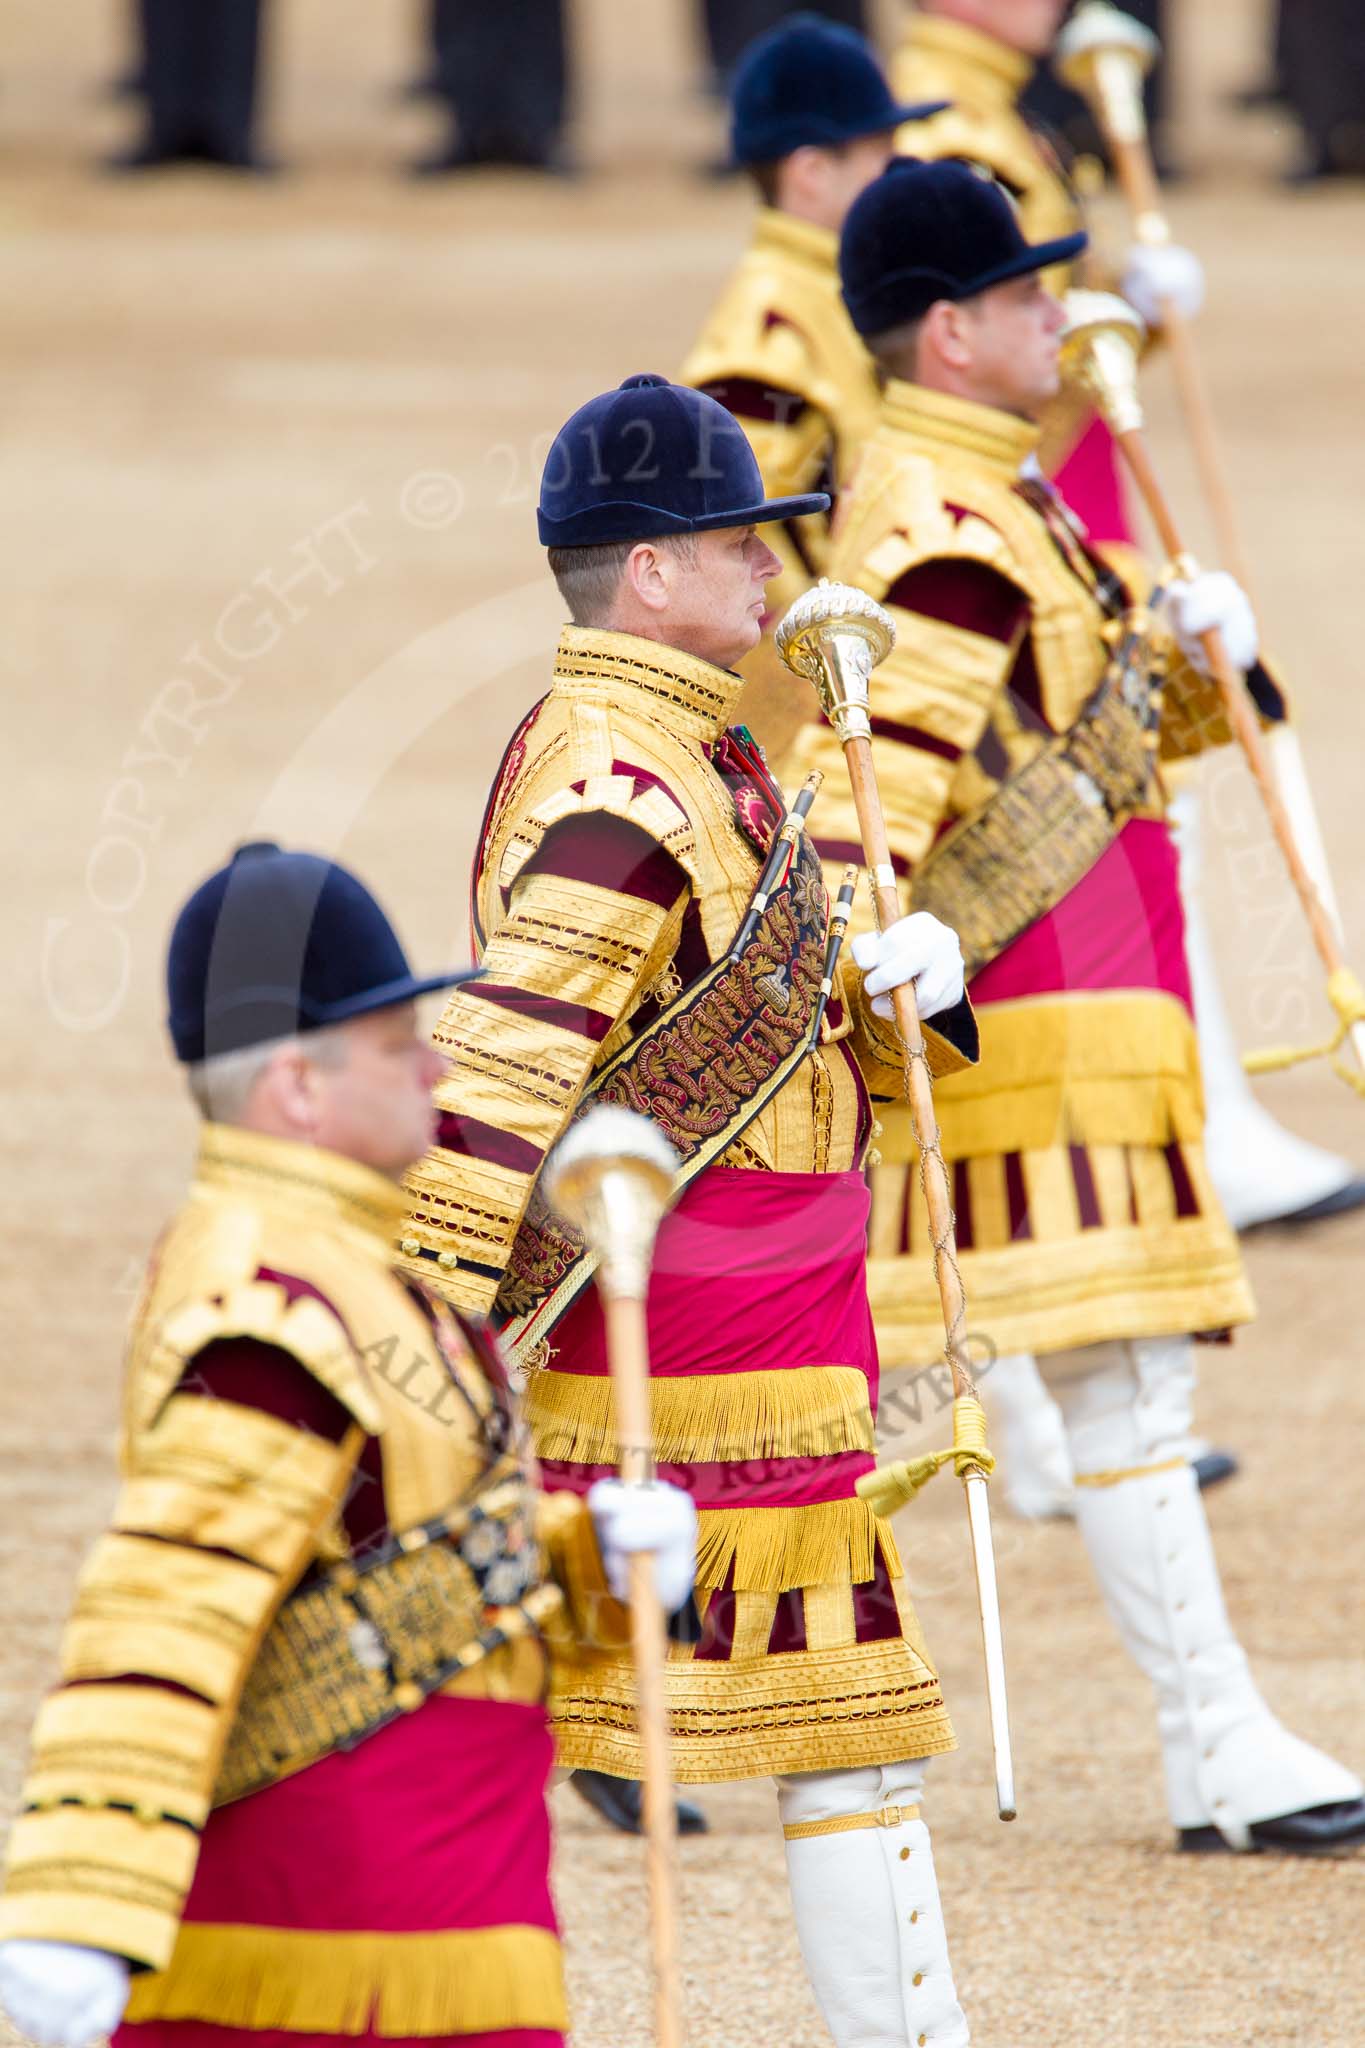 Trooping the Colour 2012: The five Drum Majors during the Massed Bands Troop. In focus, with fascinating detail on the state uniform, Drum Major Stephen Staite, Grenadier Guards..
Horse Guards Parade, Westminster,
London SW1,

United Kingdom,
on 16 June 2012 at 11:14, image #280